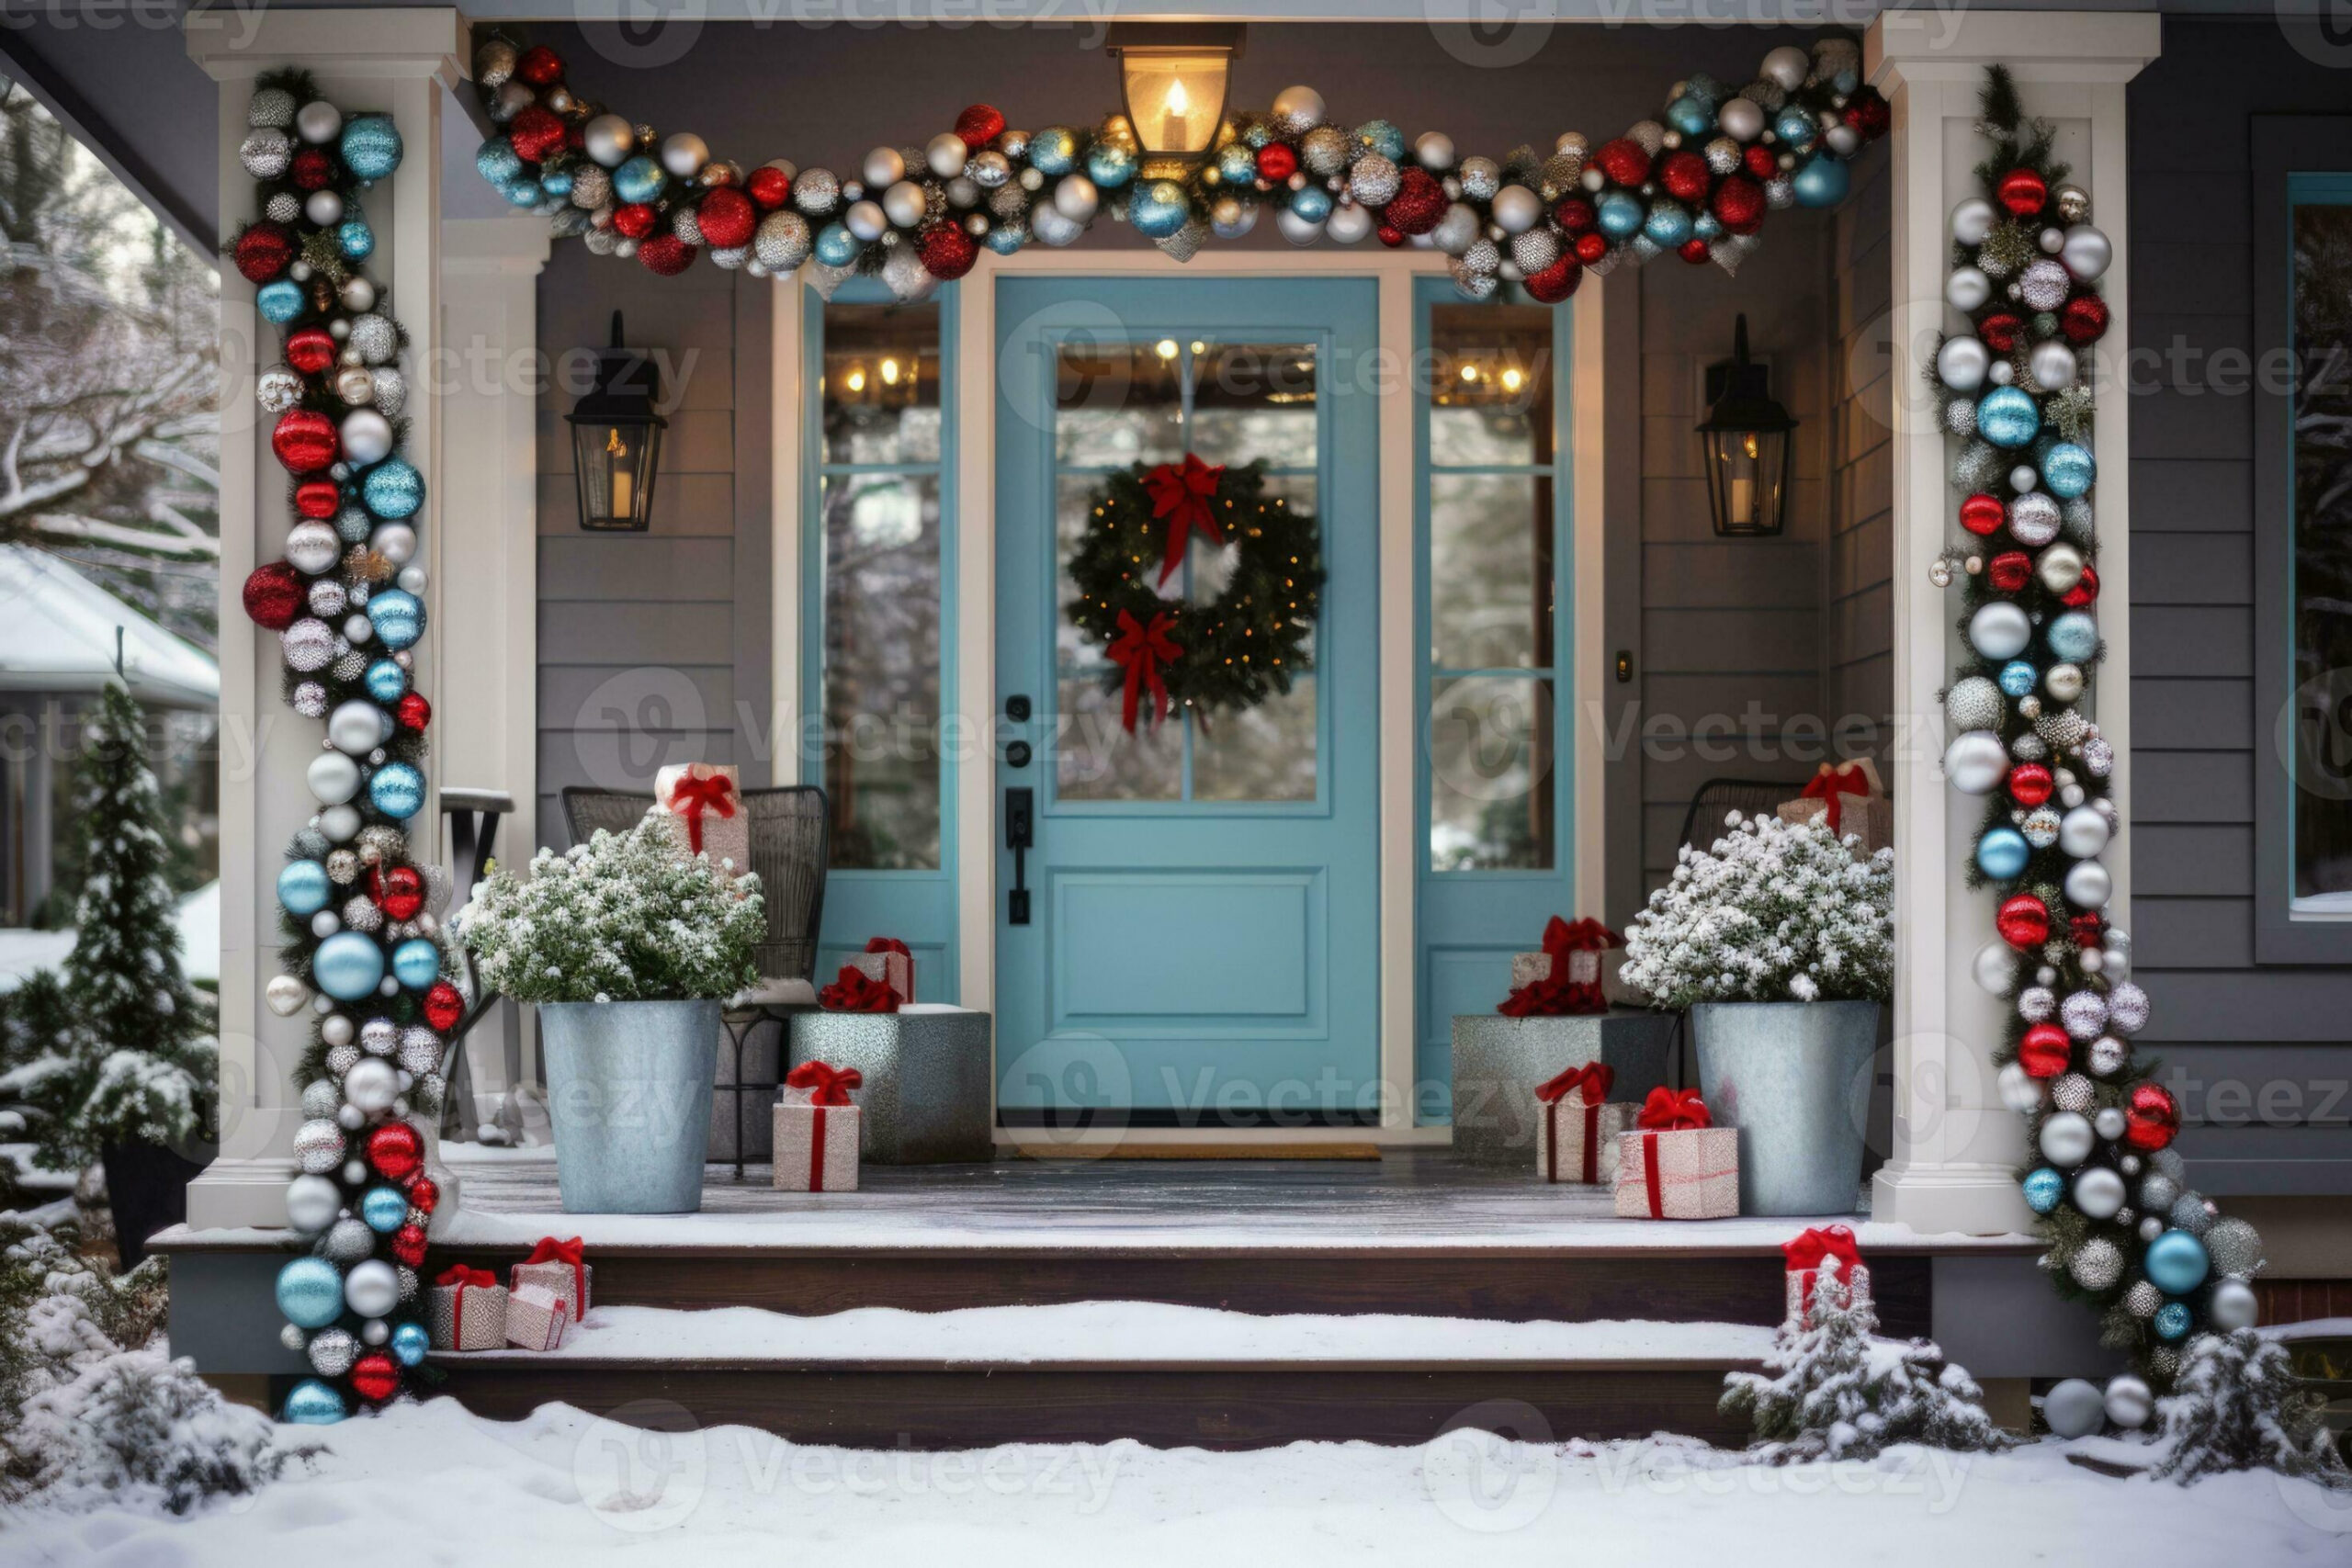 s inspired Christmas porch decorated with vintage holiday